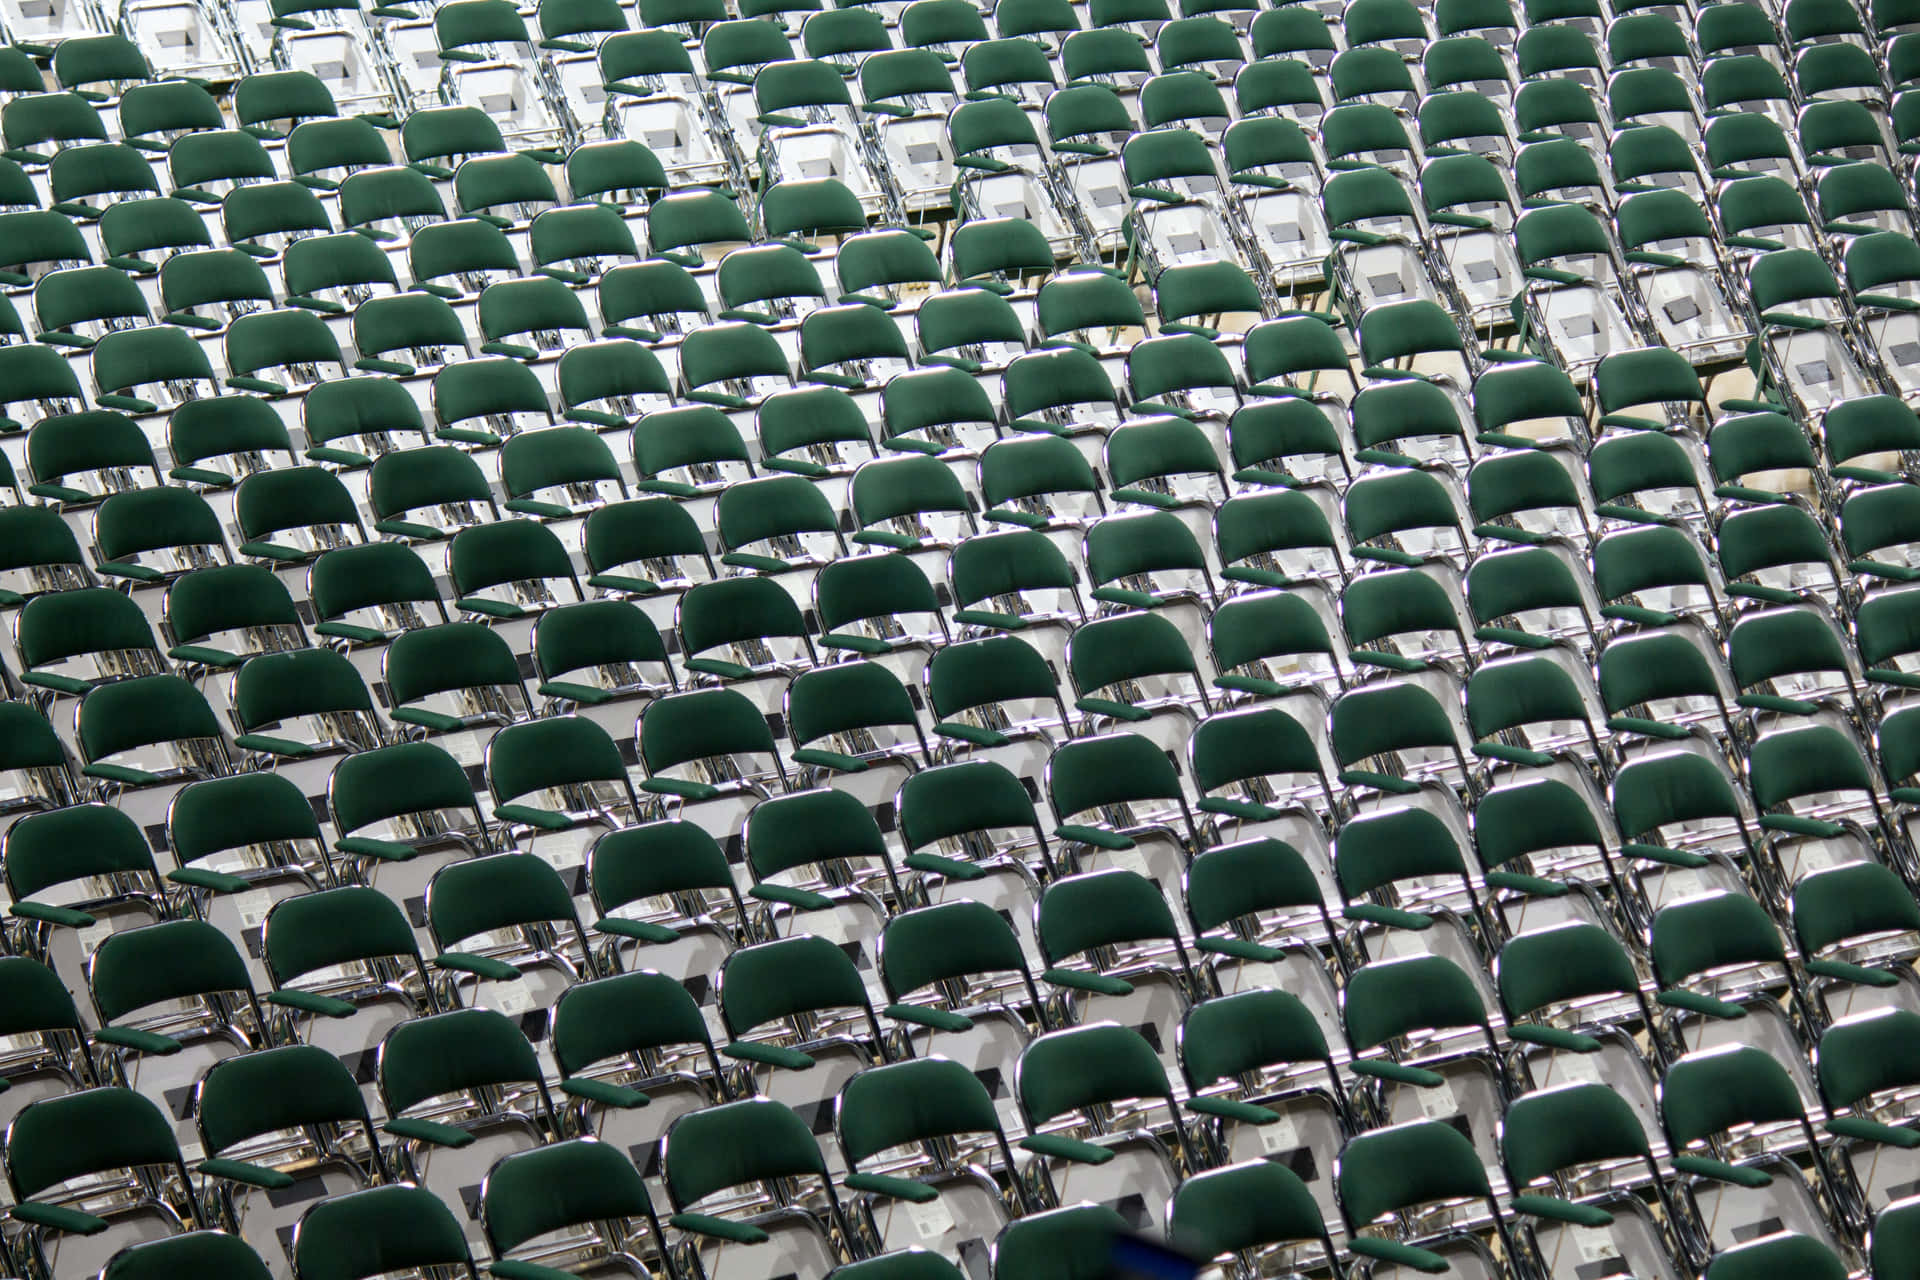 Repetitive Green Chairs [wallpaper] Wallpaper